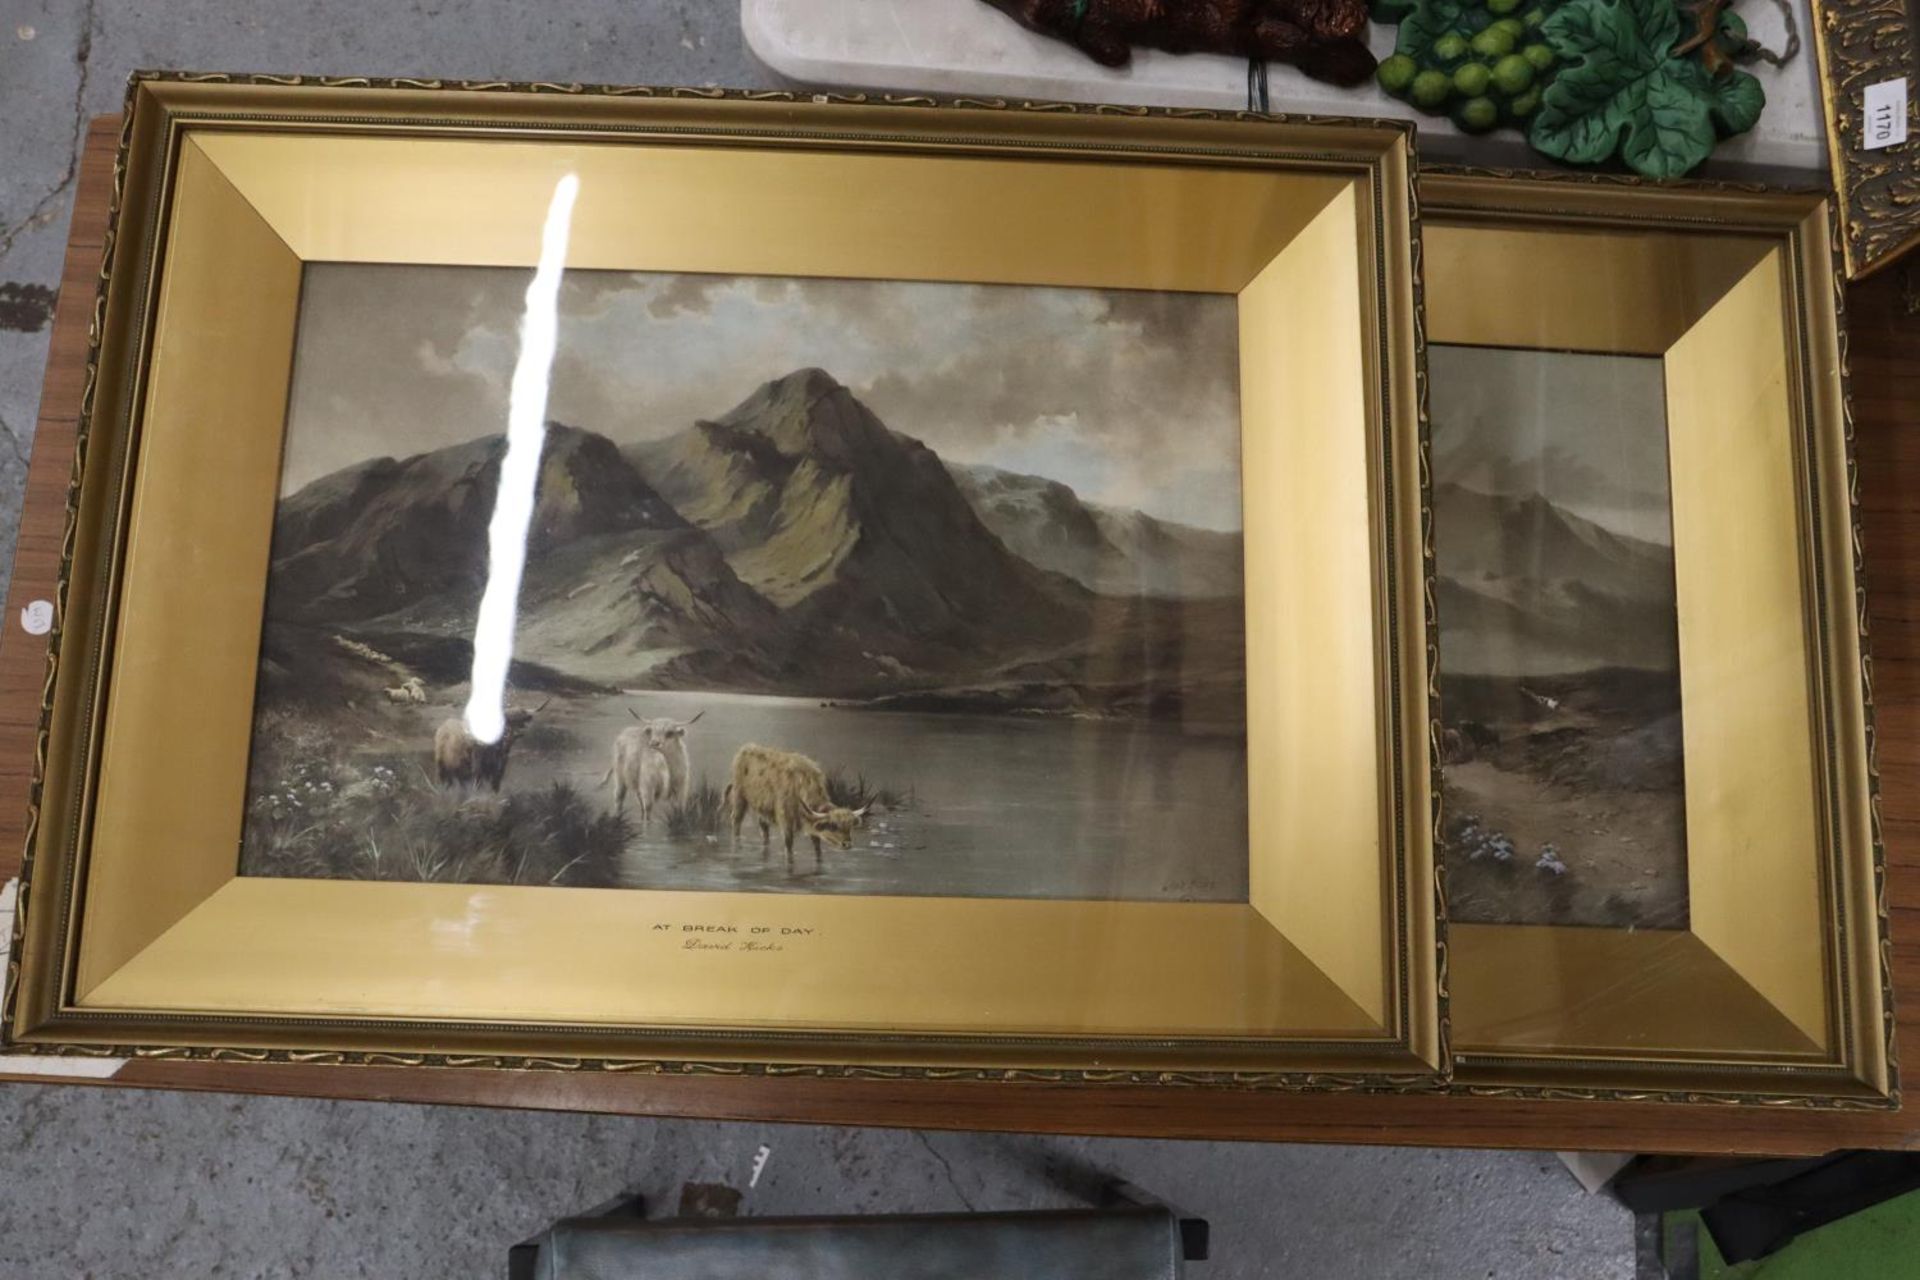 A PAIR OF GILT FRAMED PRINTS BY DAVID HICKS, OF HIGHLAND CATTLE IN A MOUNTAIN SETTING, 'AT BREAK